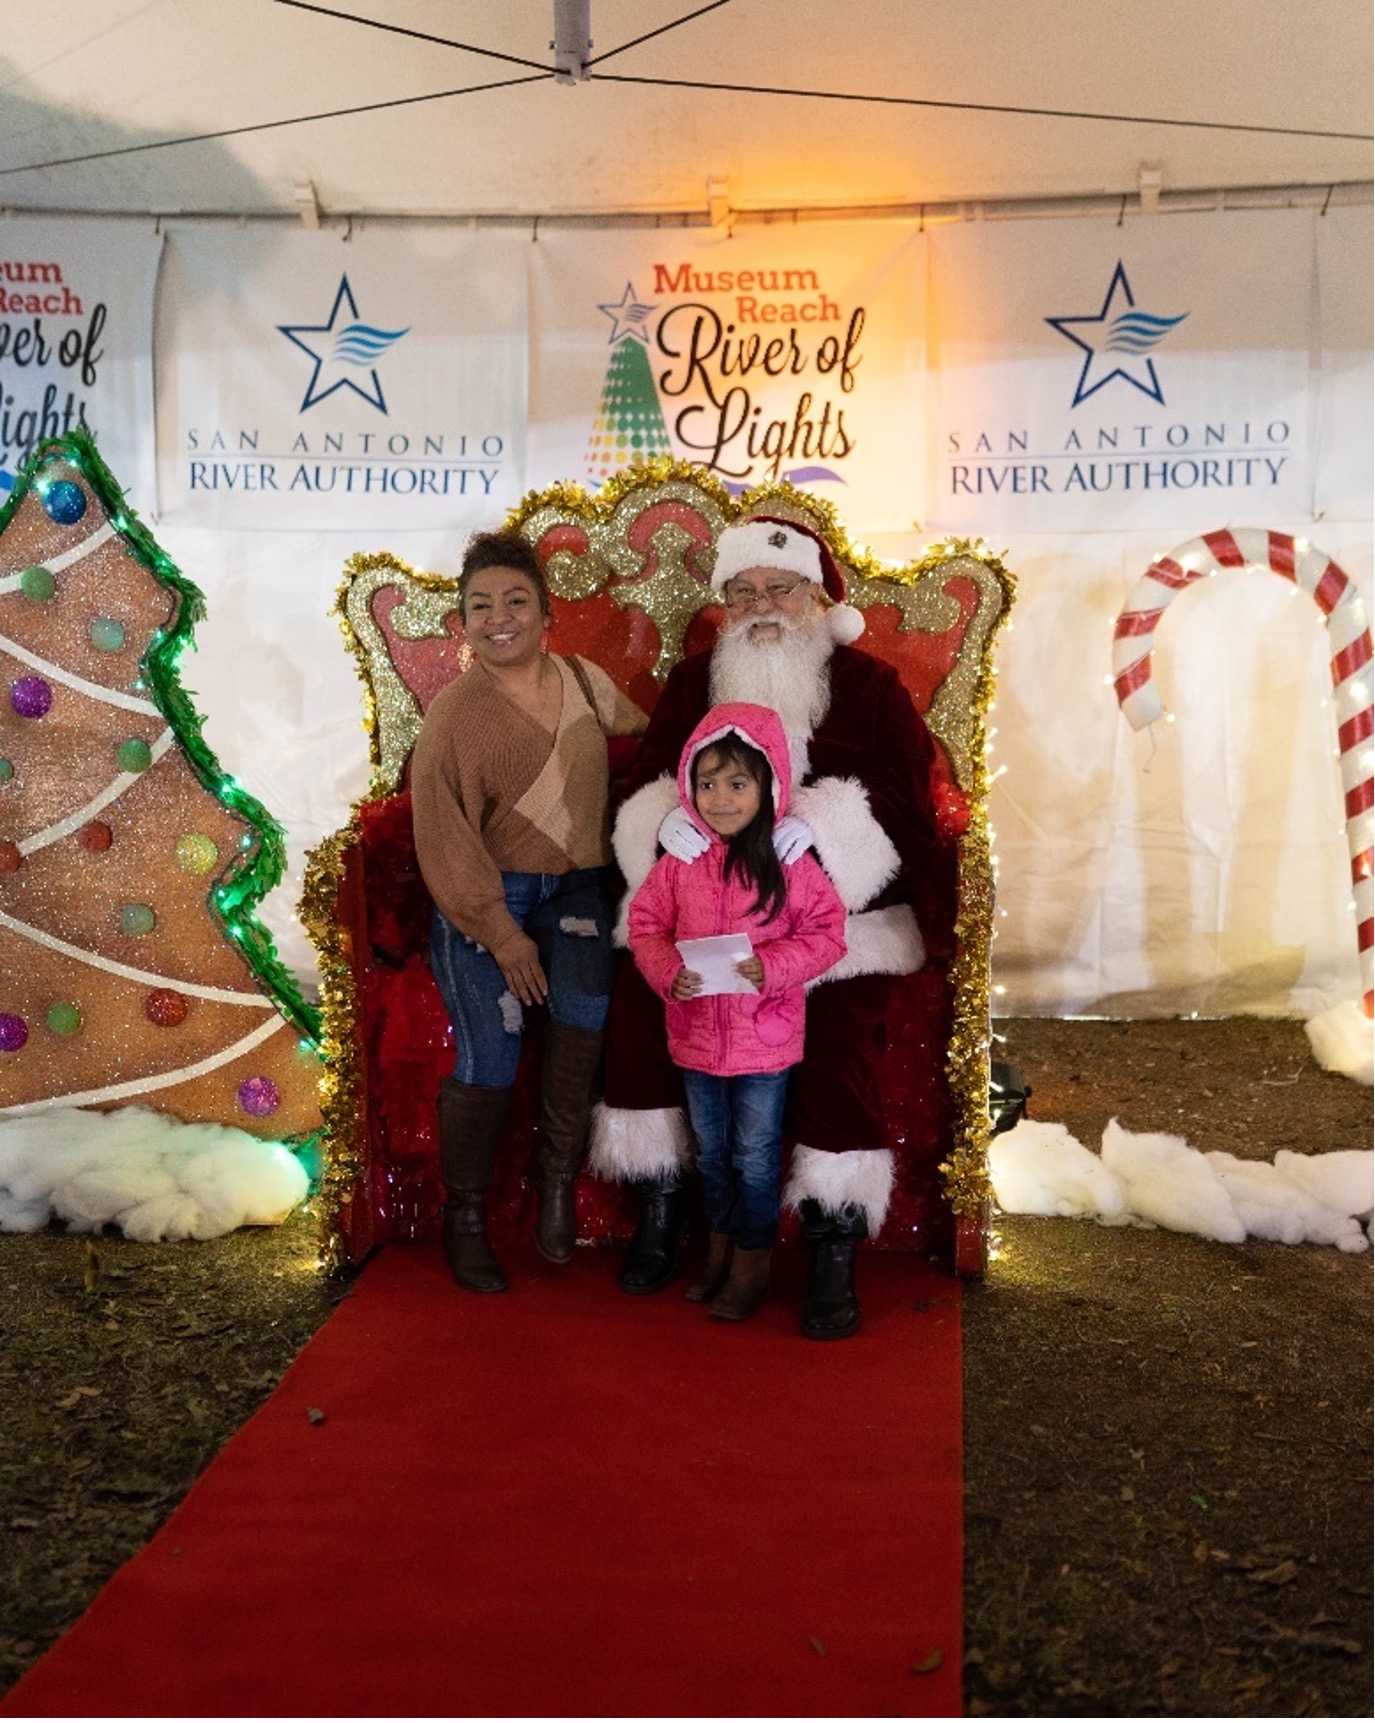 Santa made a special appearance at the River of Lights event